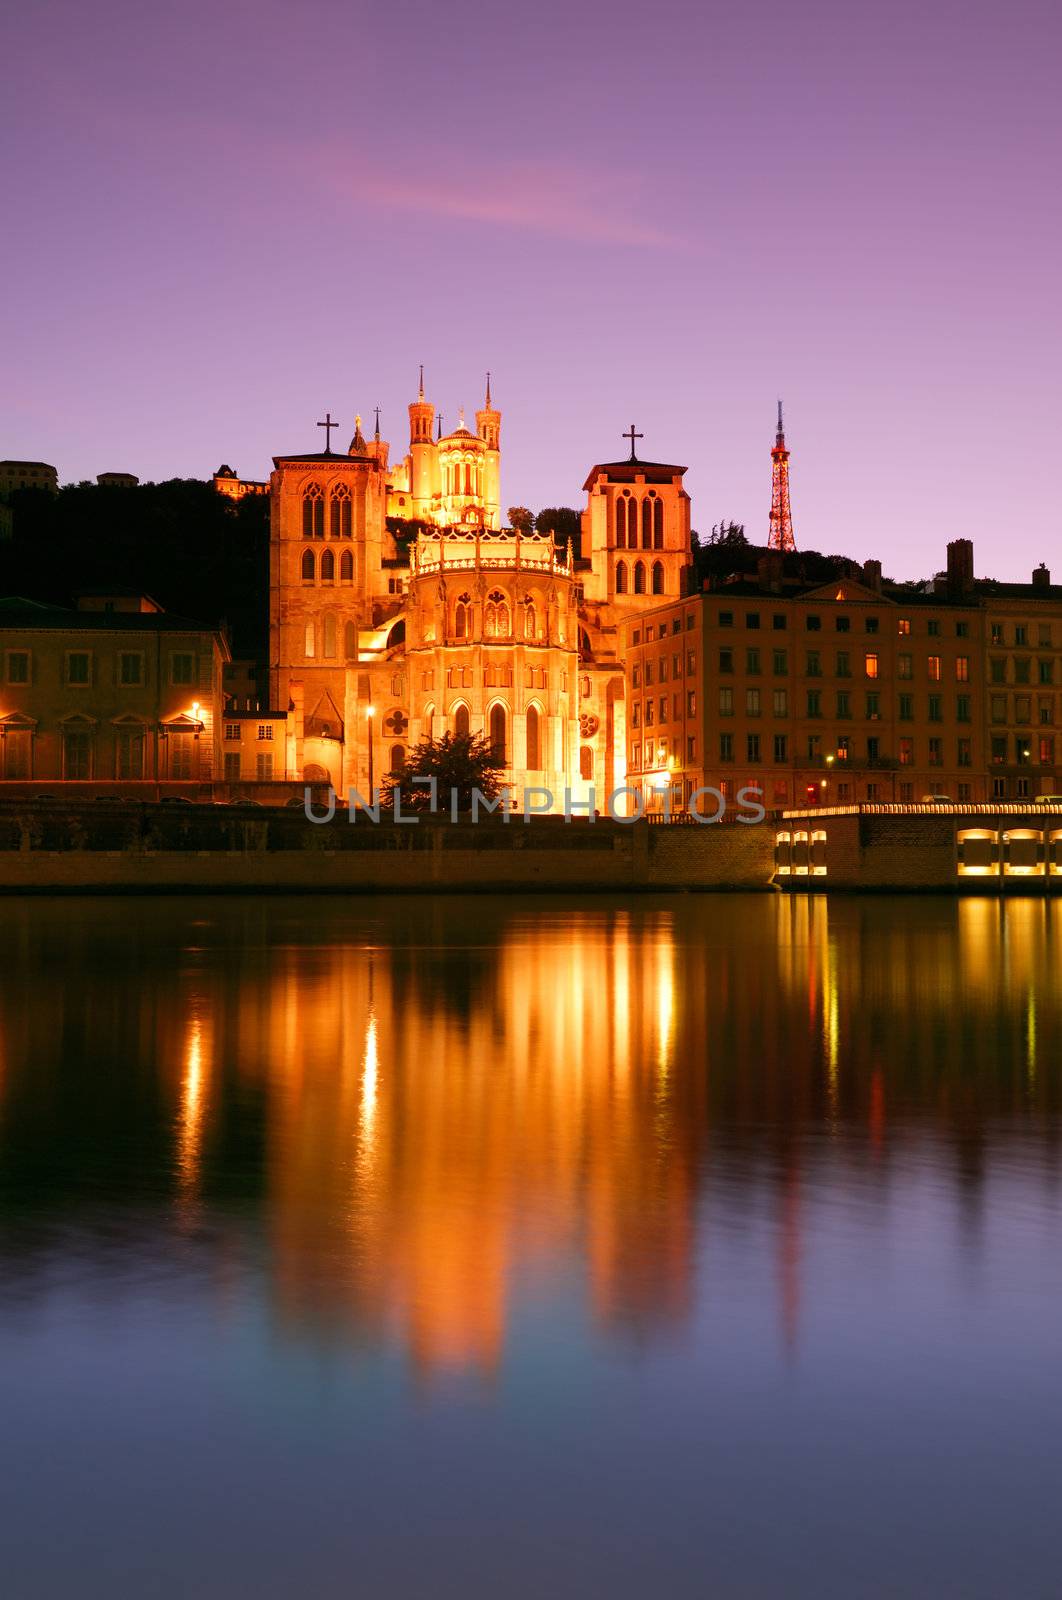 The Notre Dame de Fourviere basilica and the St. Jean cathedral both illuminated and reflected on the waters of the river Saone, in Lyon, France